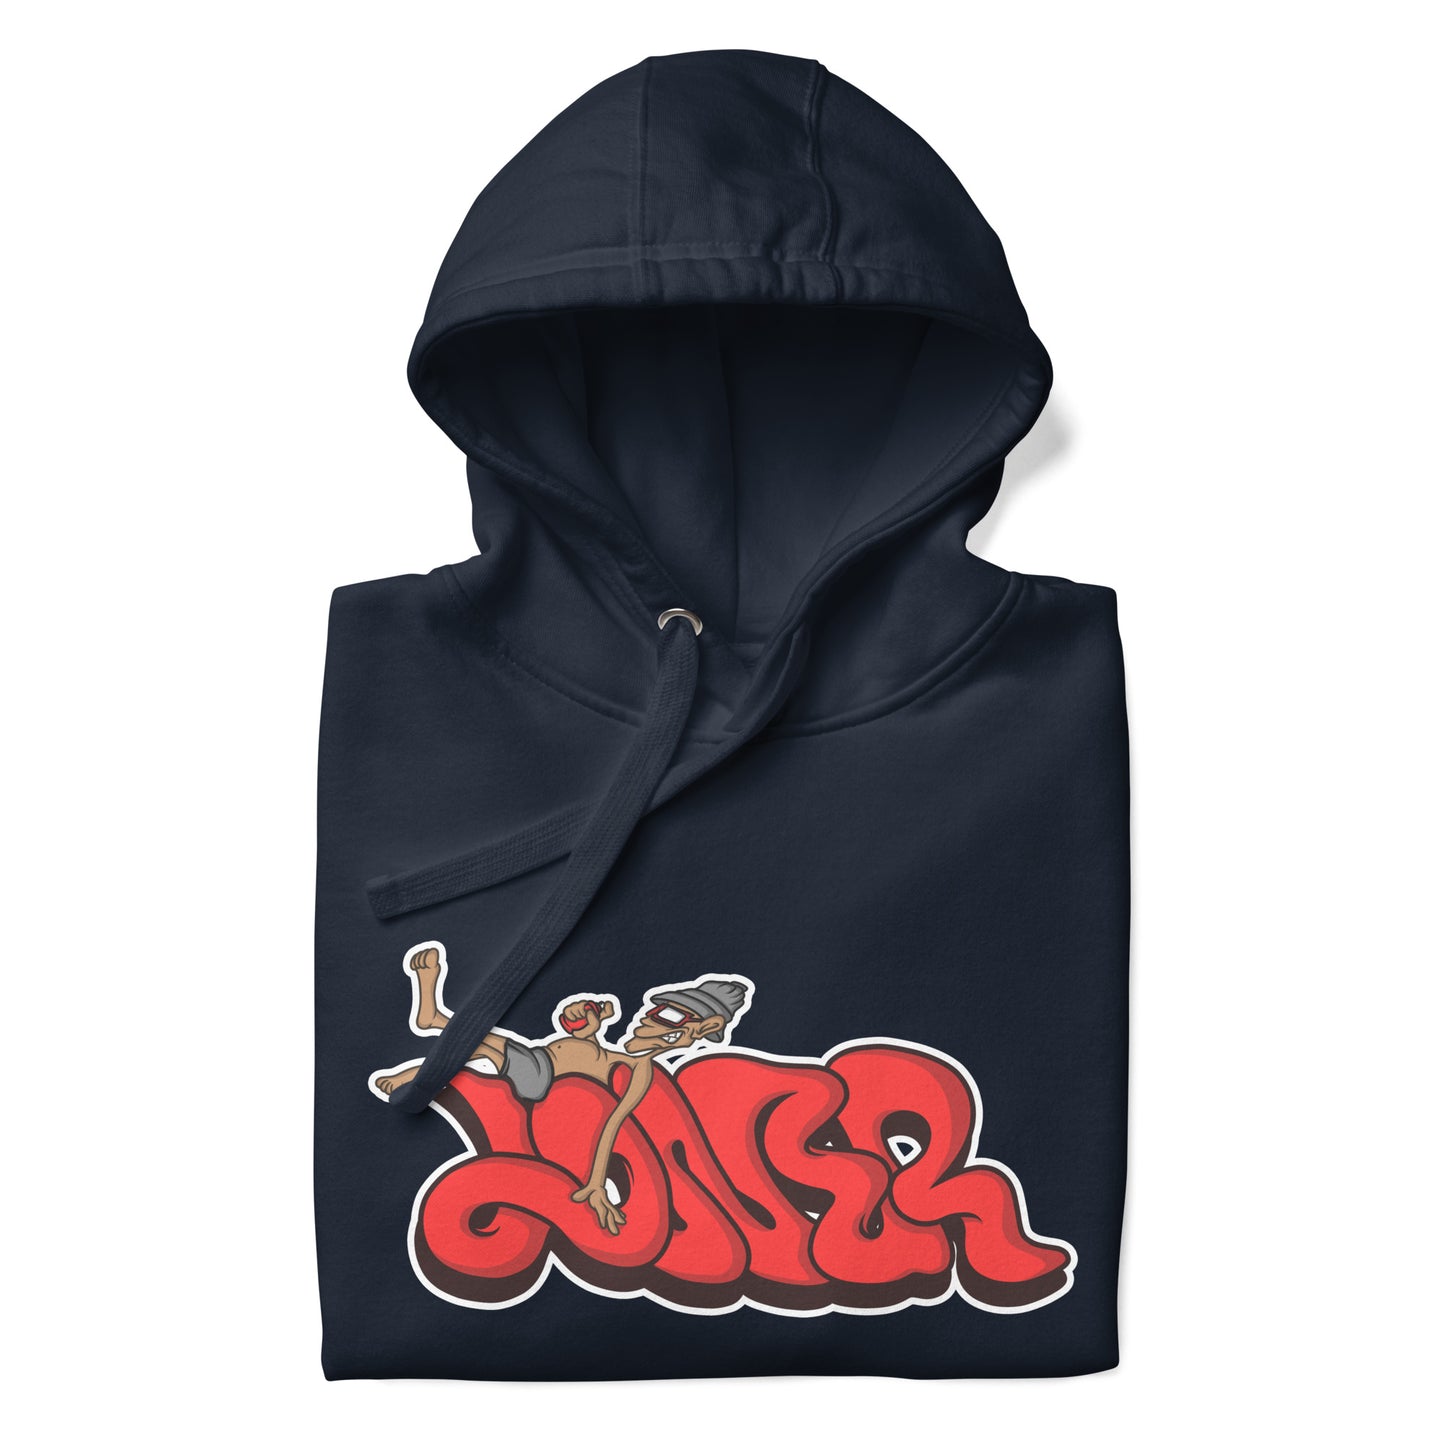 folded Loner hoodie navy by B.Different Clothing street art graffiti inspired streetwear brand for weirdos, outsiders, and misfits.